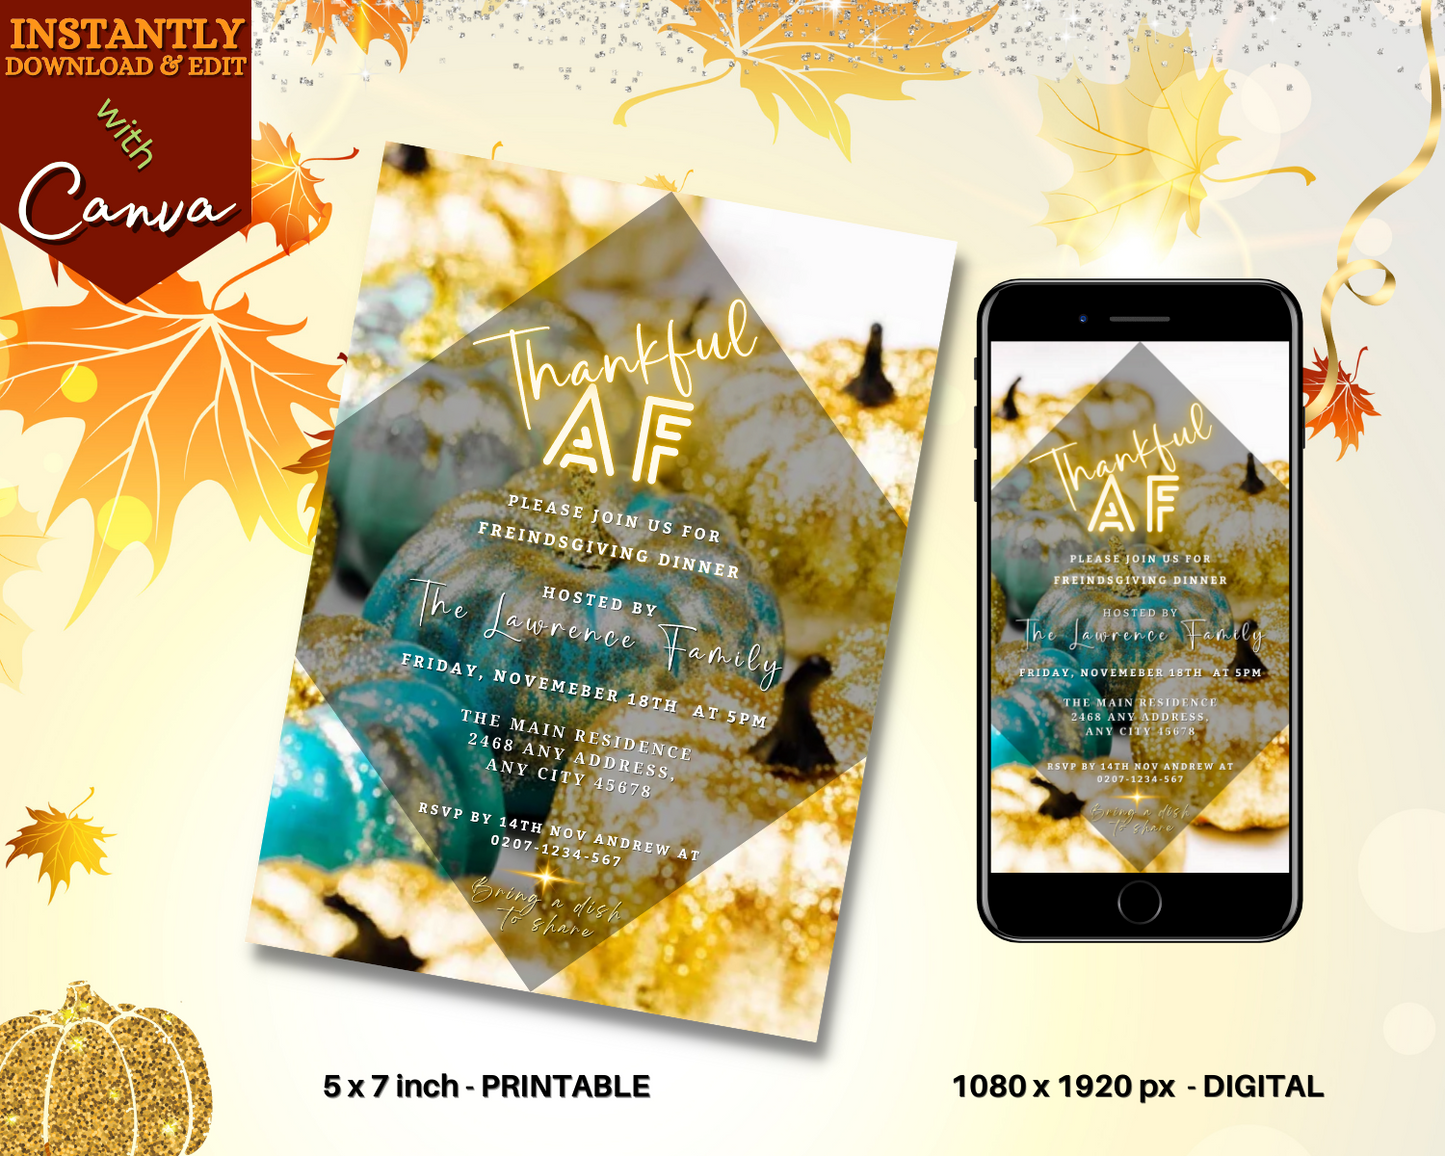 Neon Gold Teal Leaves Pumpkin | Thankful AF Thanksgiving Evite template displayed on a mobile phone screen alongside a printed invitation card.